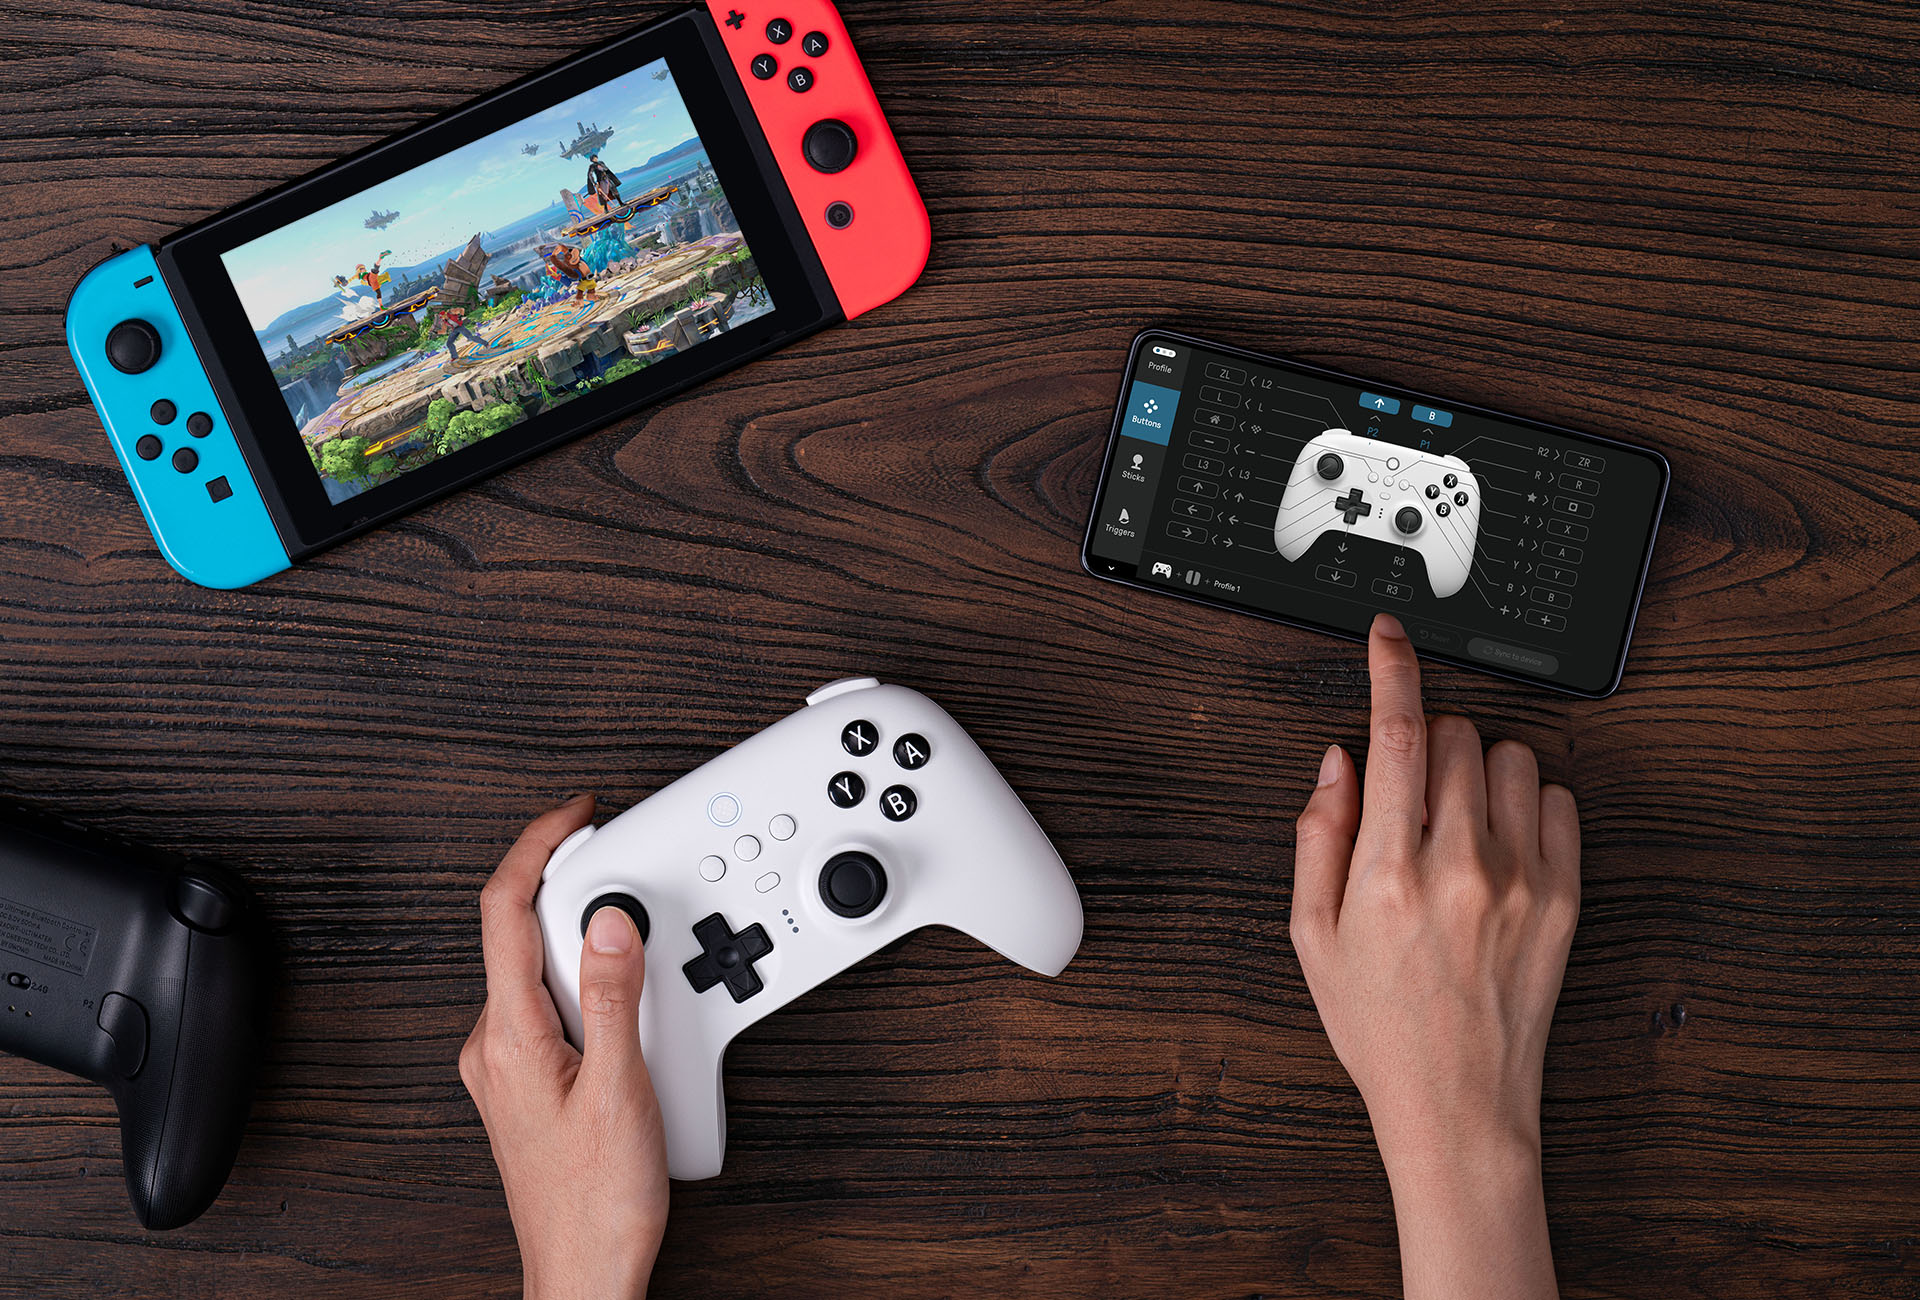 8Bitdo Ultimate Bluetooth Controller with Charging Dock, Wireless Pro  Controller with Hall Effect Sensing Joystick, Compatible with Switch,  Windows